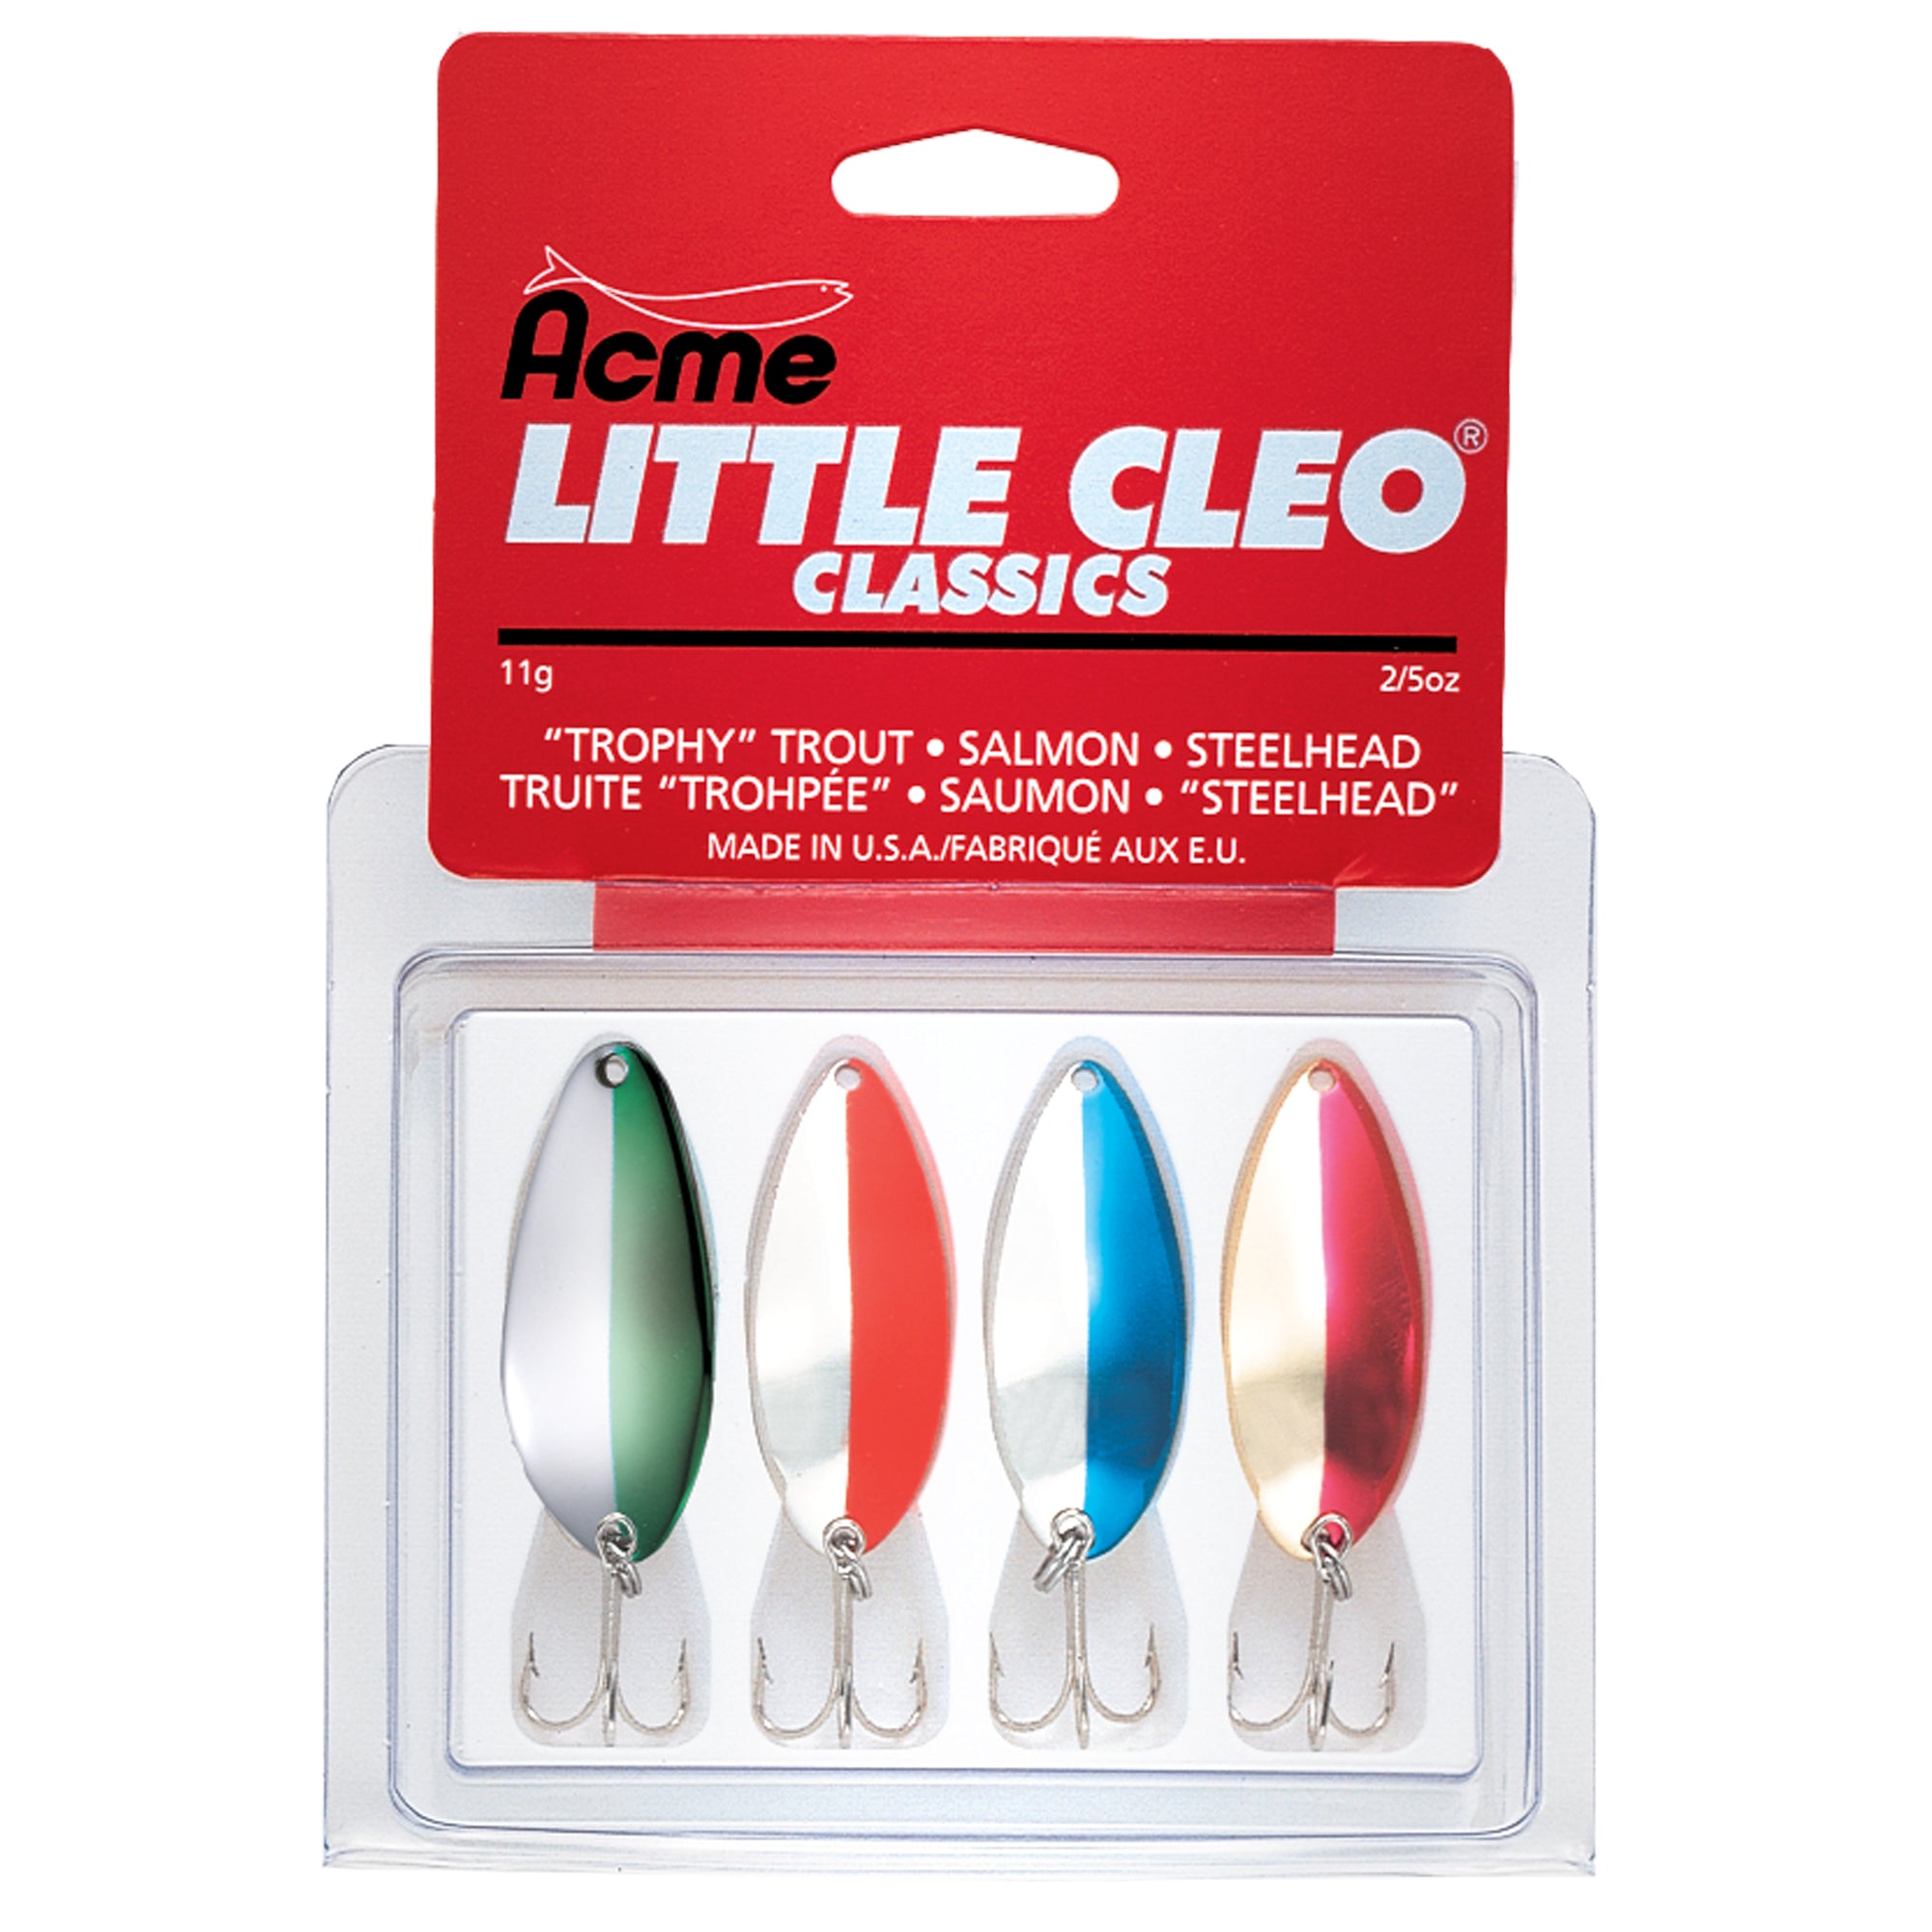 Little Cleo Classic Kit-4 Pack